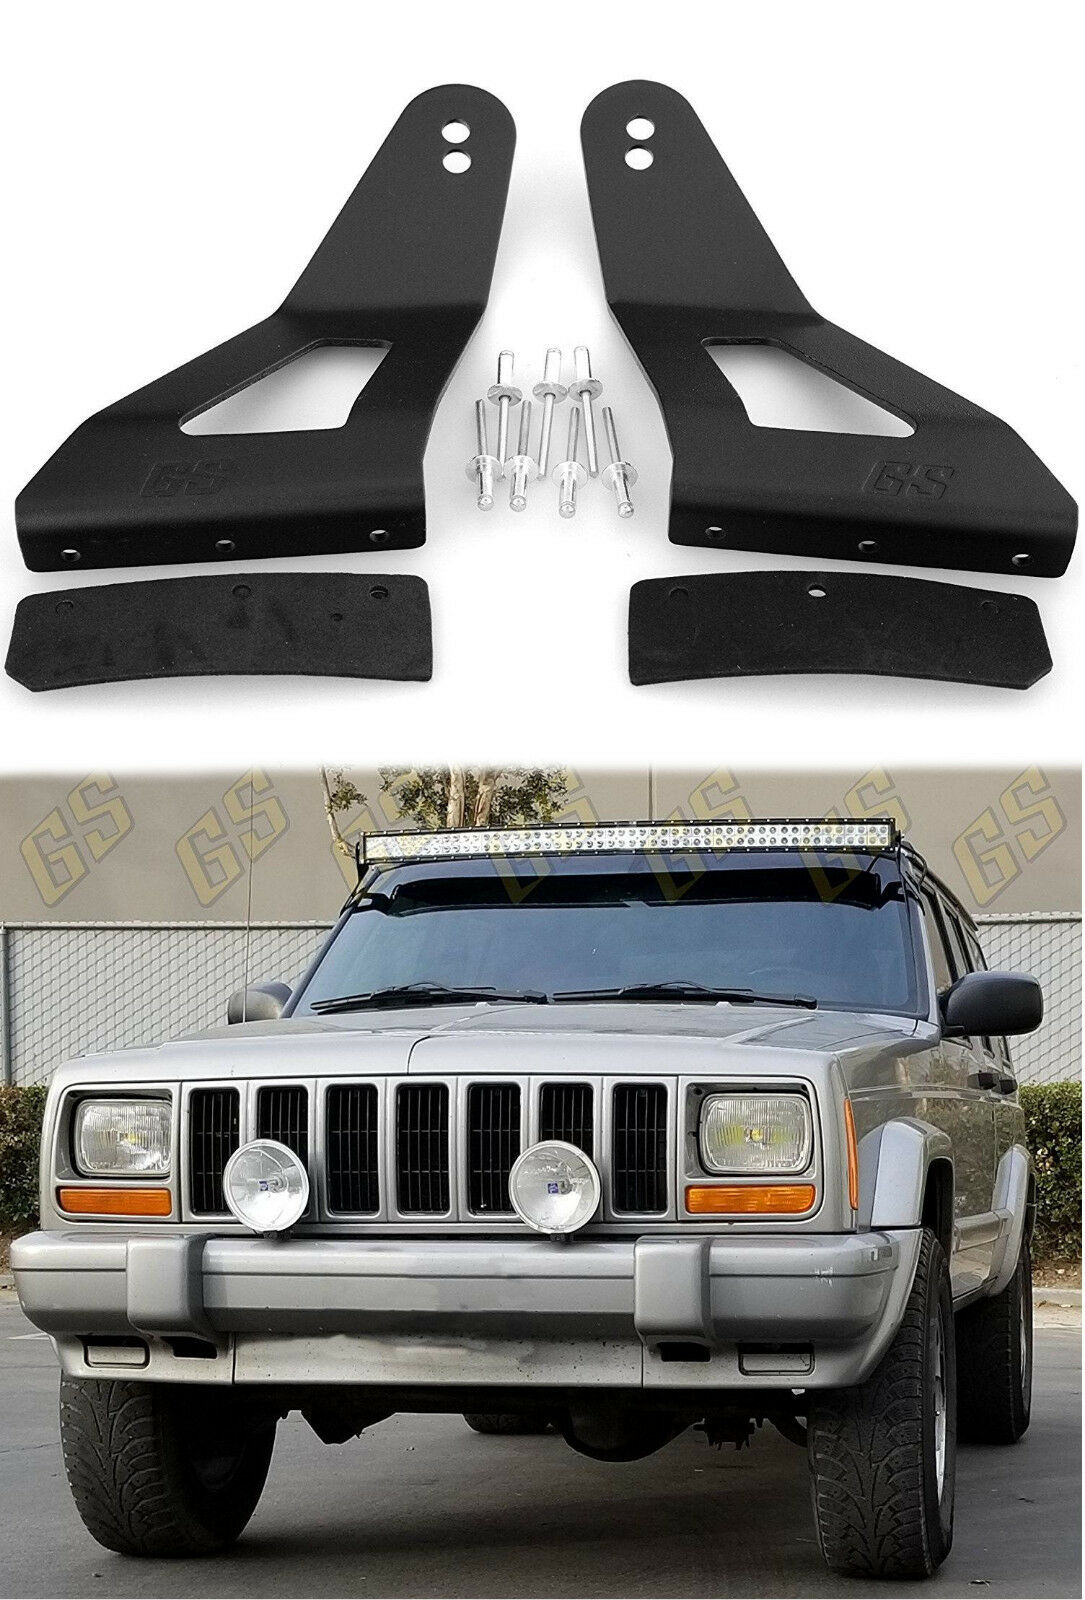 Led Light Bar Mounting Brackets 52" & 50" Curved For Jeep Cherokee Xj 1984-2001